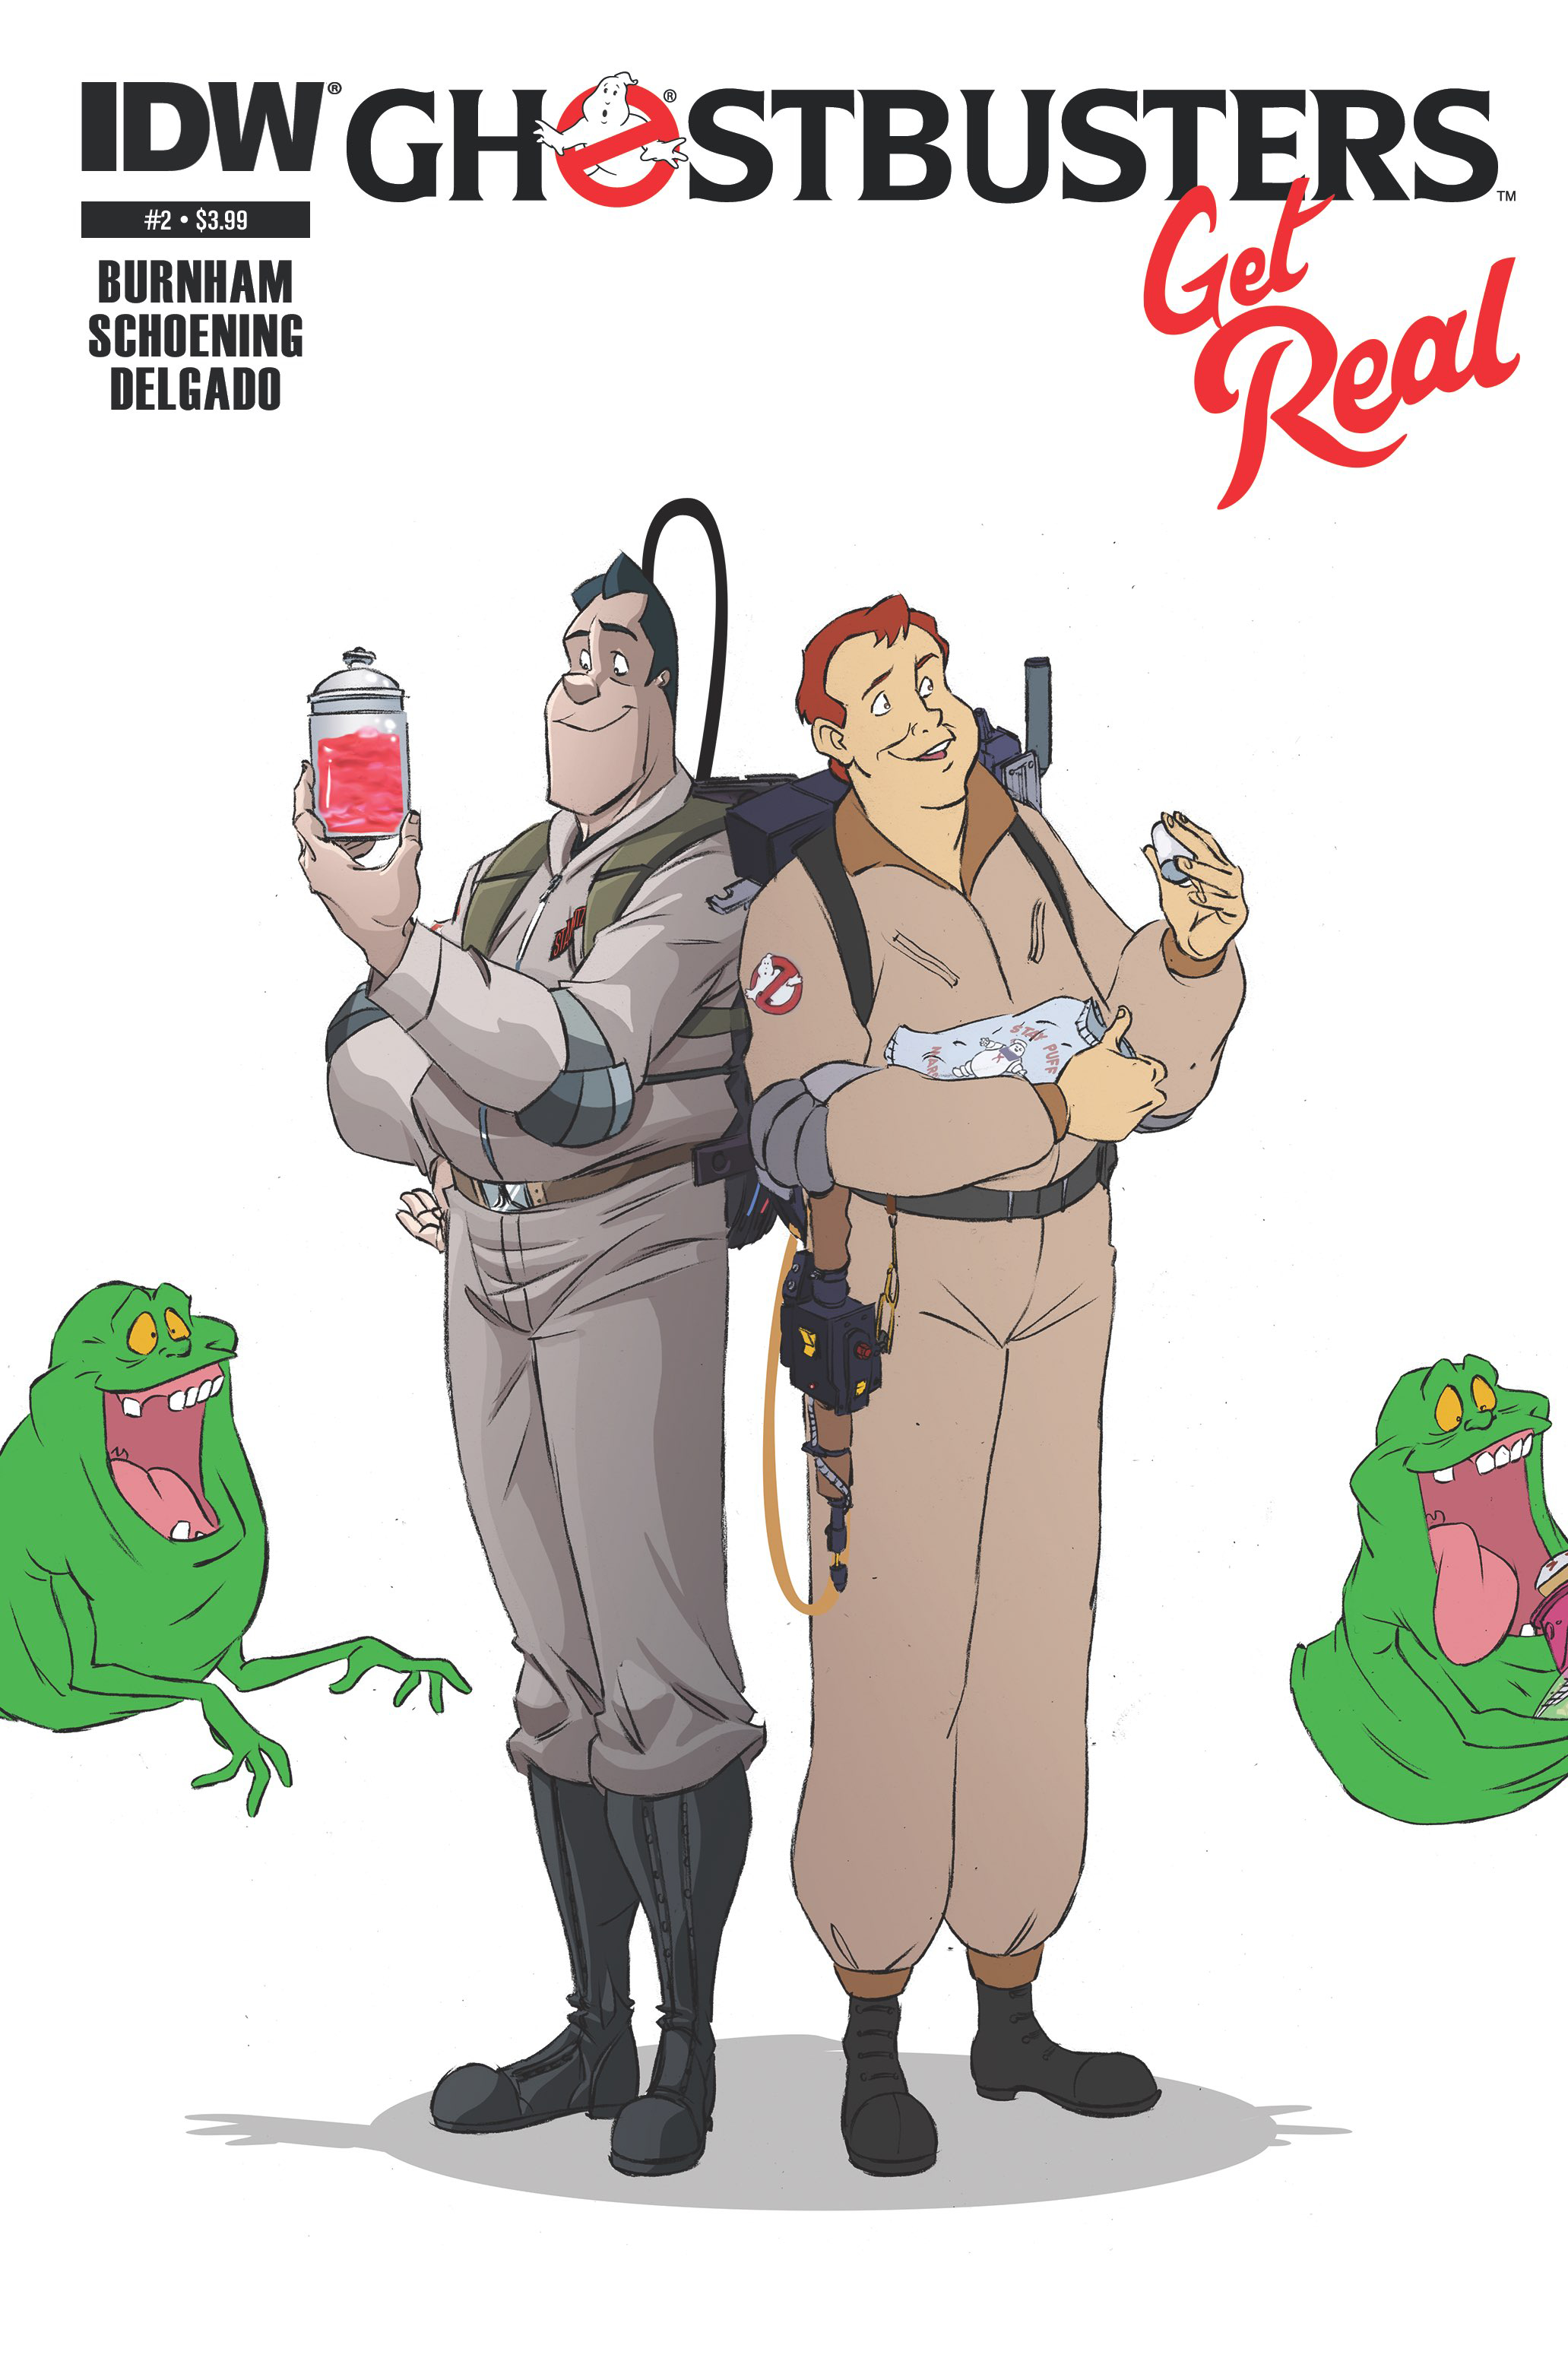 GHOSTBUSTERS GET REAL #2 (OF 4)